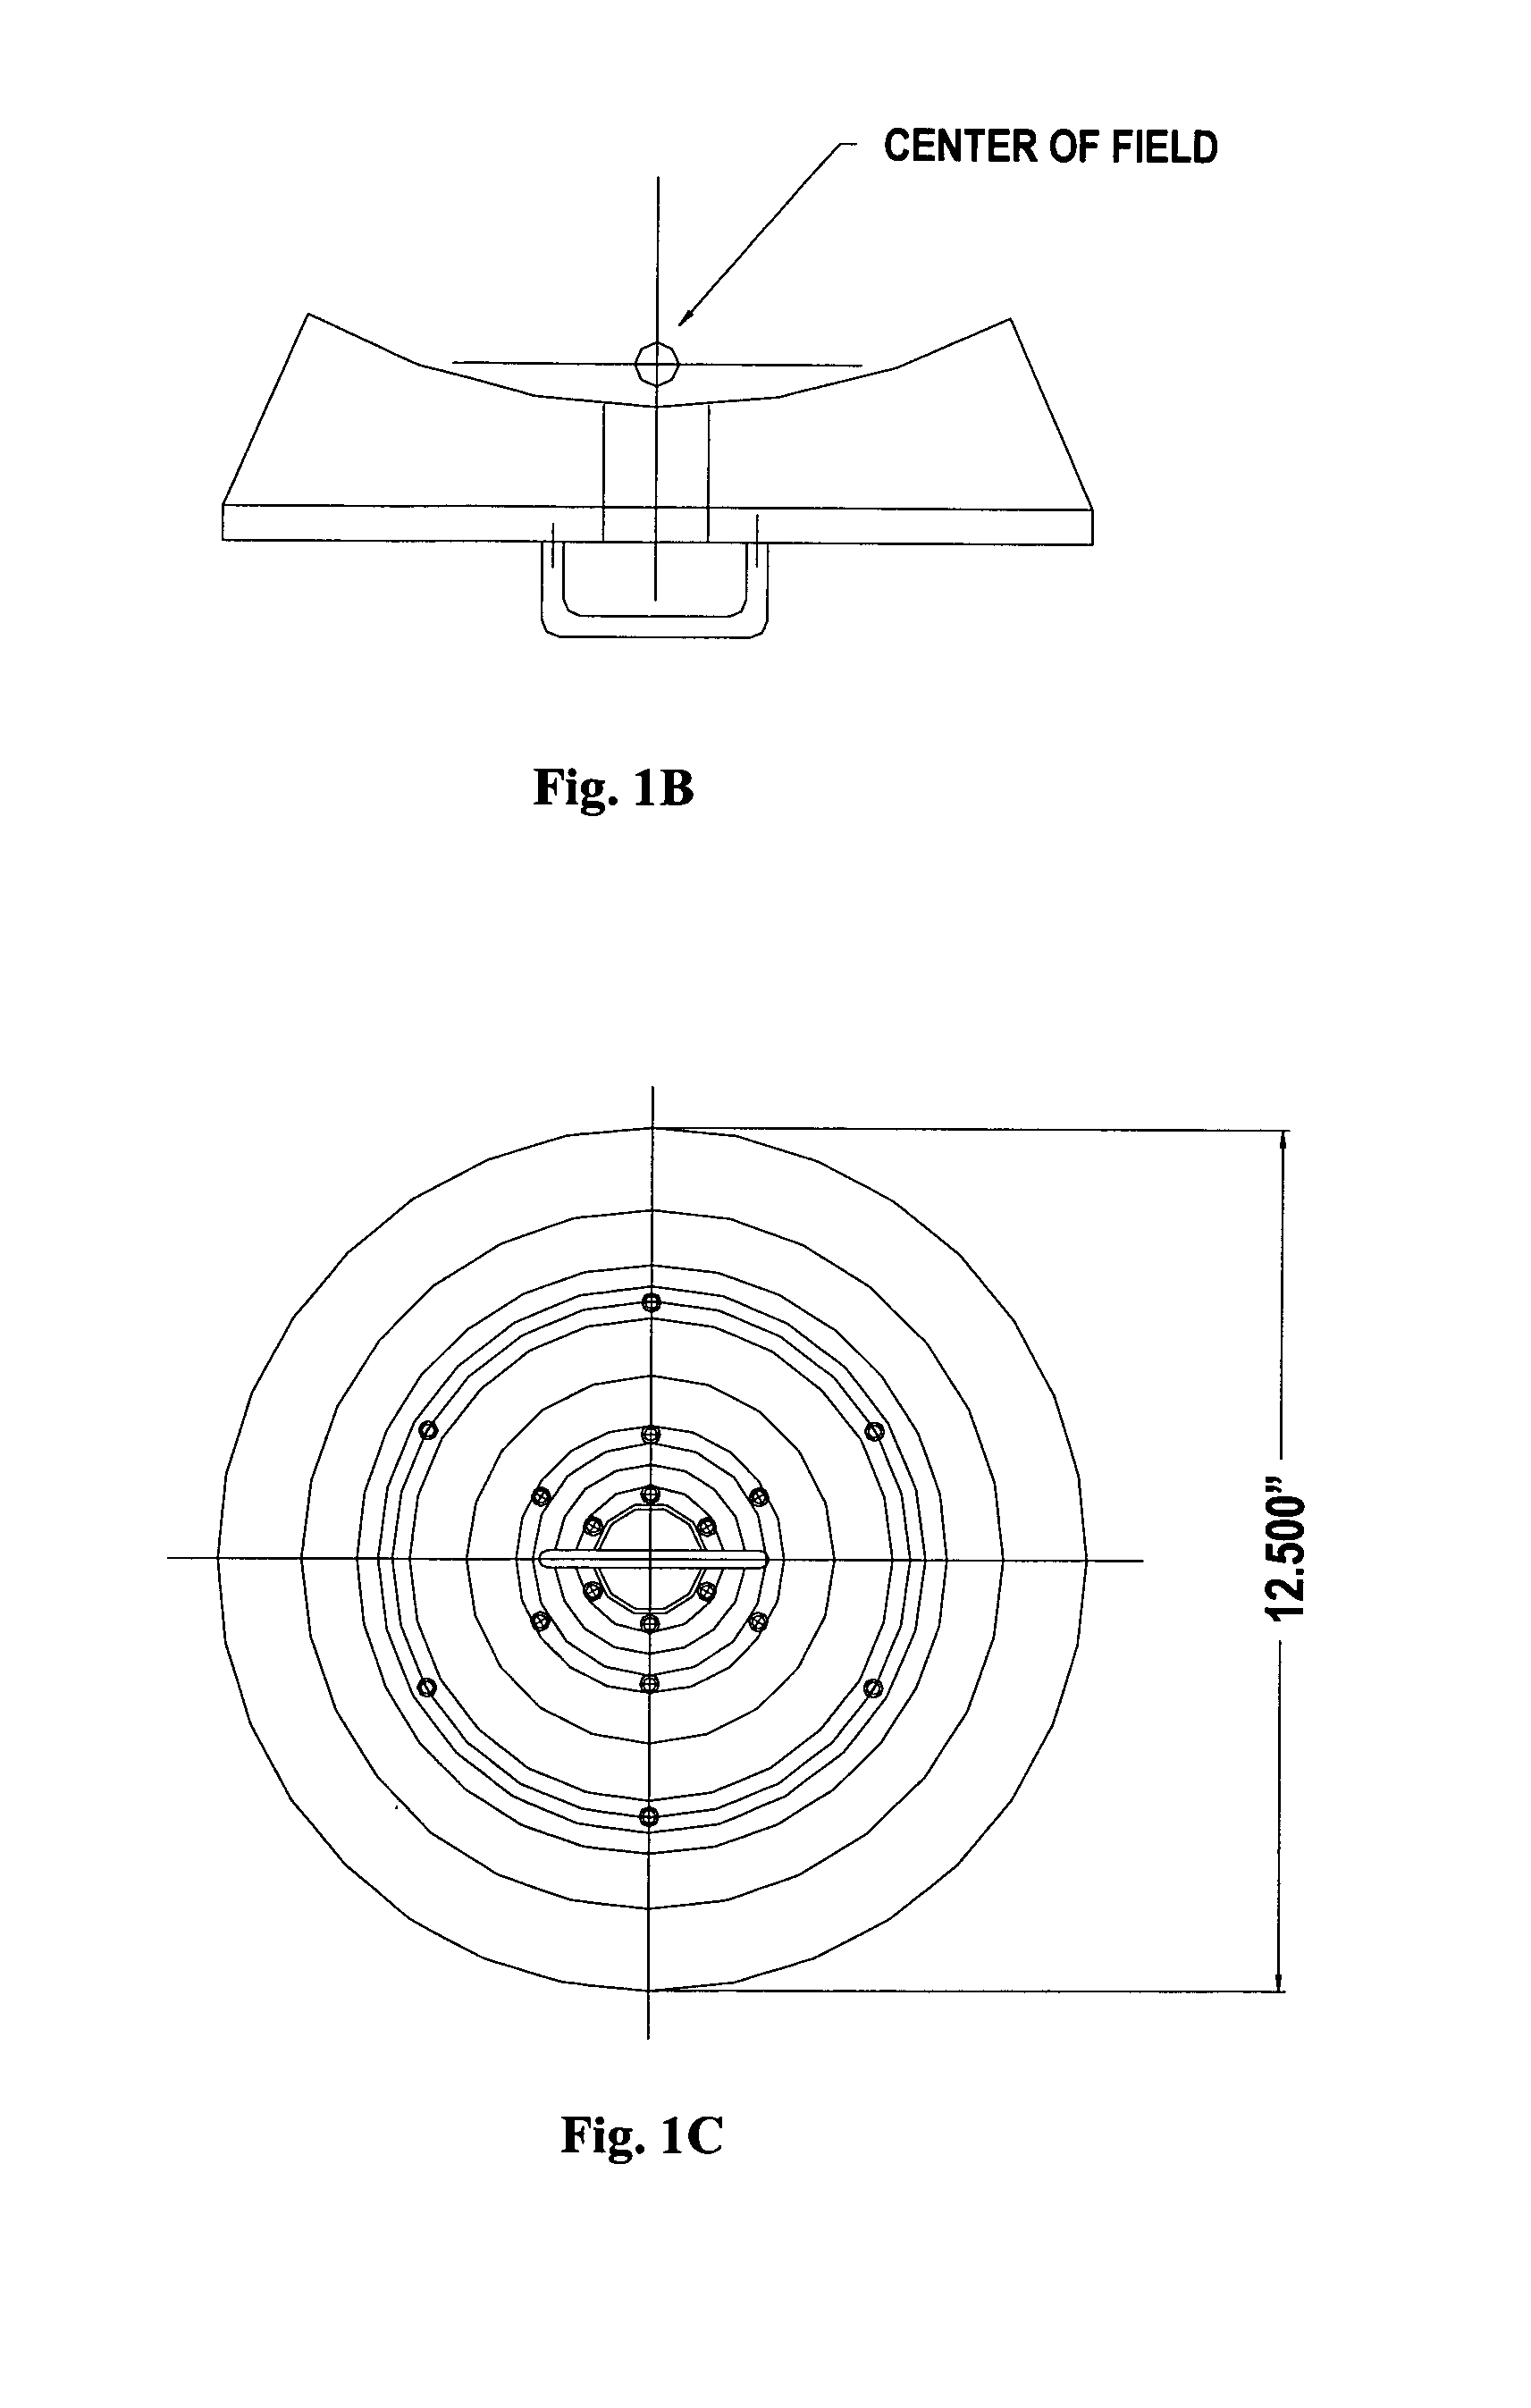 Methods and apparatus for post-exposure determination of ionizing radiation dose